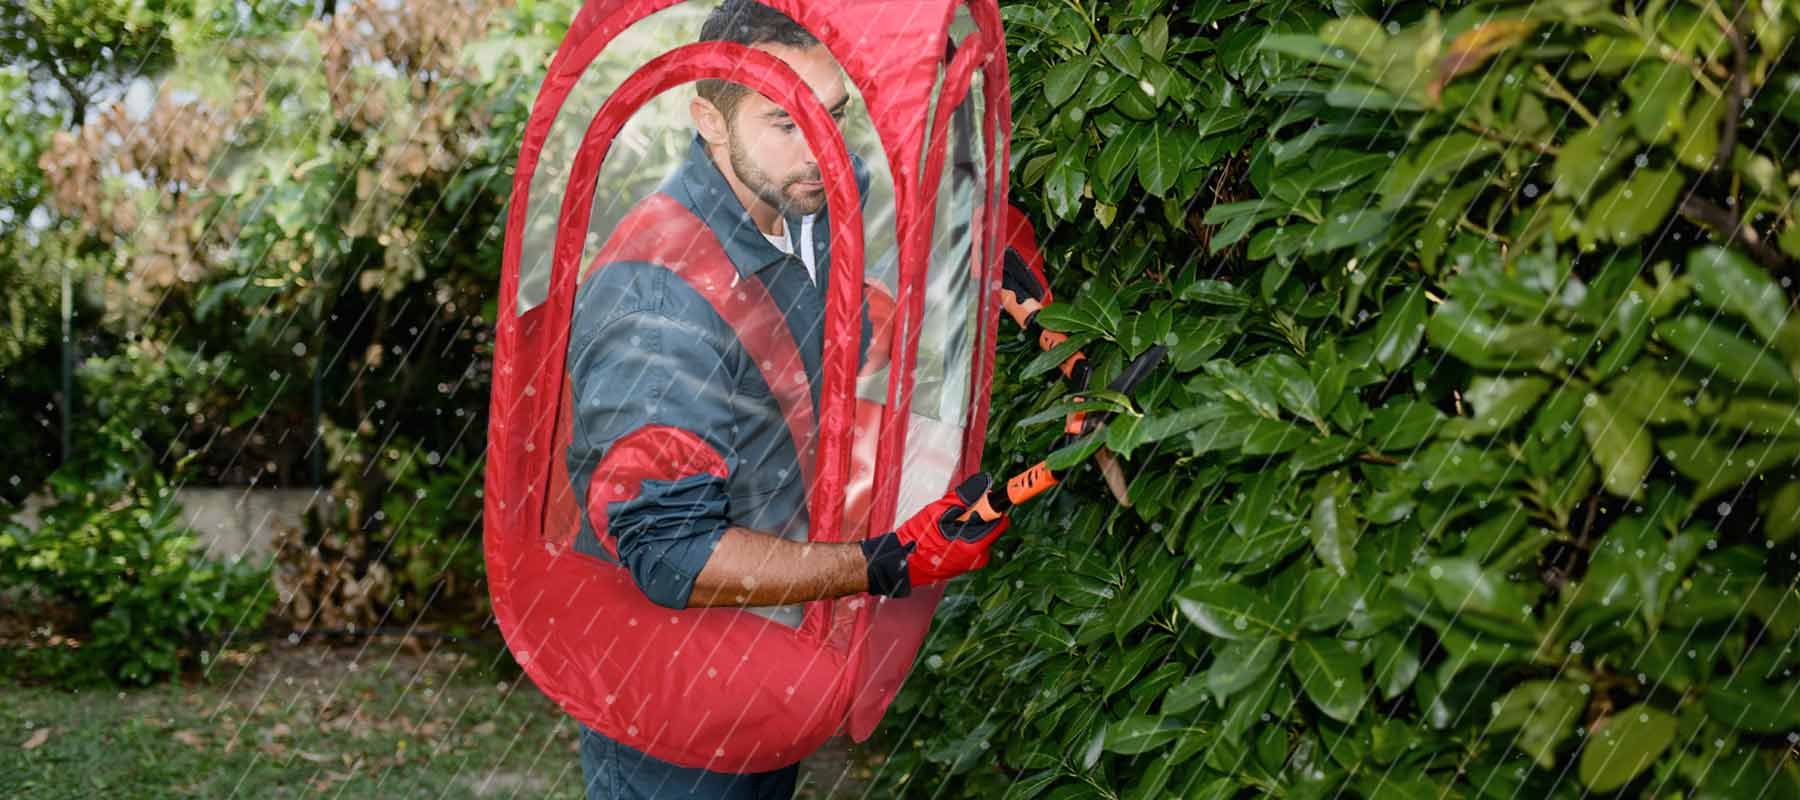 Wearable pop-up Pods keep occupants dry and warm while walking or working outdoors.